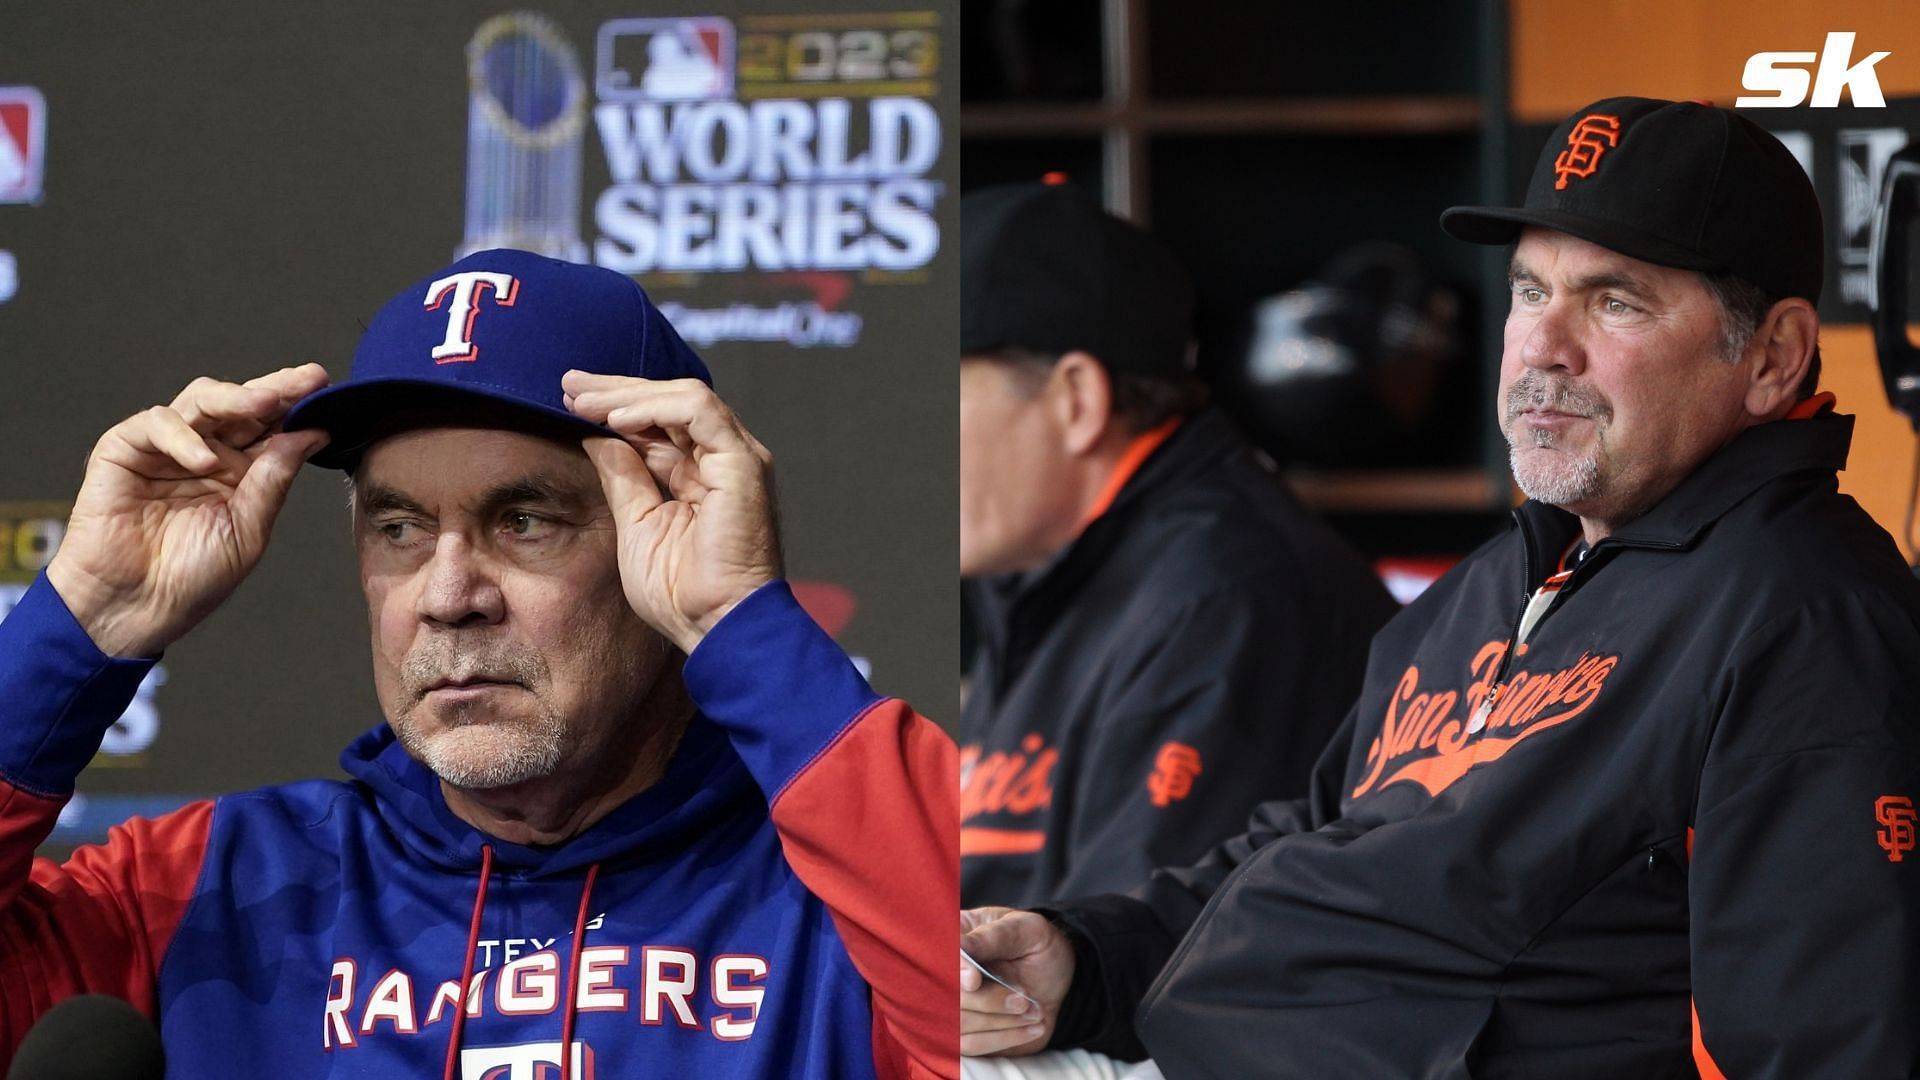 Bruce Bochy’s San Francisco Giants humiliated Texas Rangers 9-0 in Game 2 of 2010 World Series